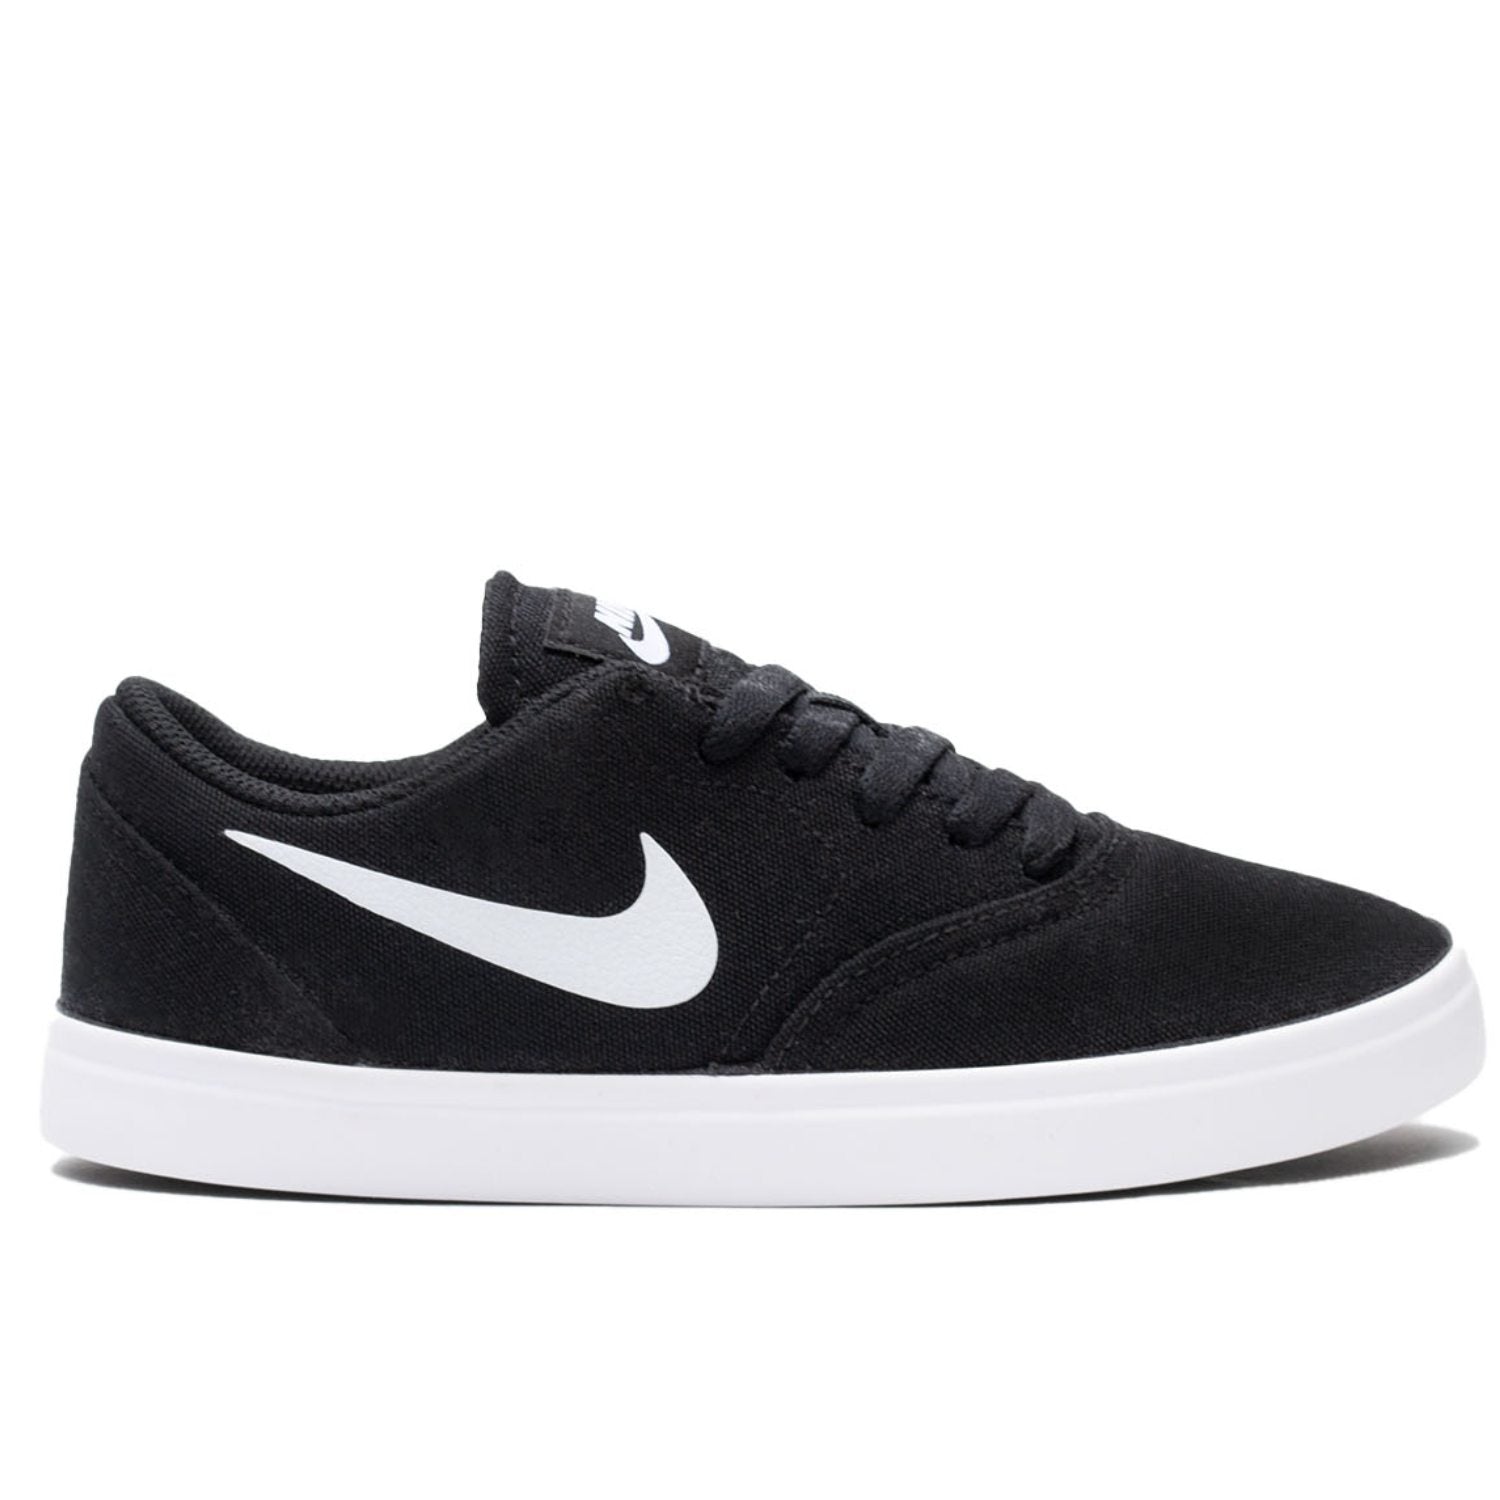 Nike SB - Check Canvas (Grade School) - 905373-003 Black with white sole youth skate shoe footwear